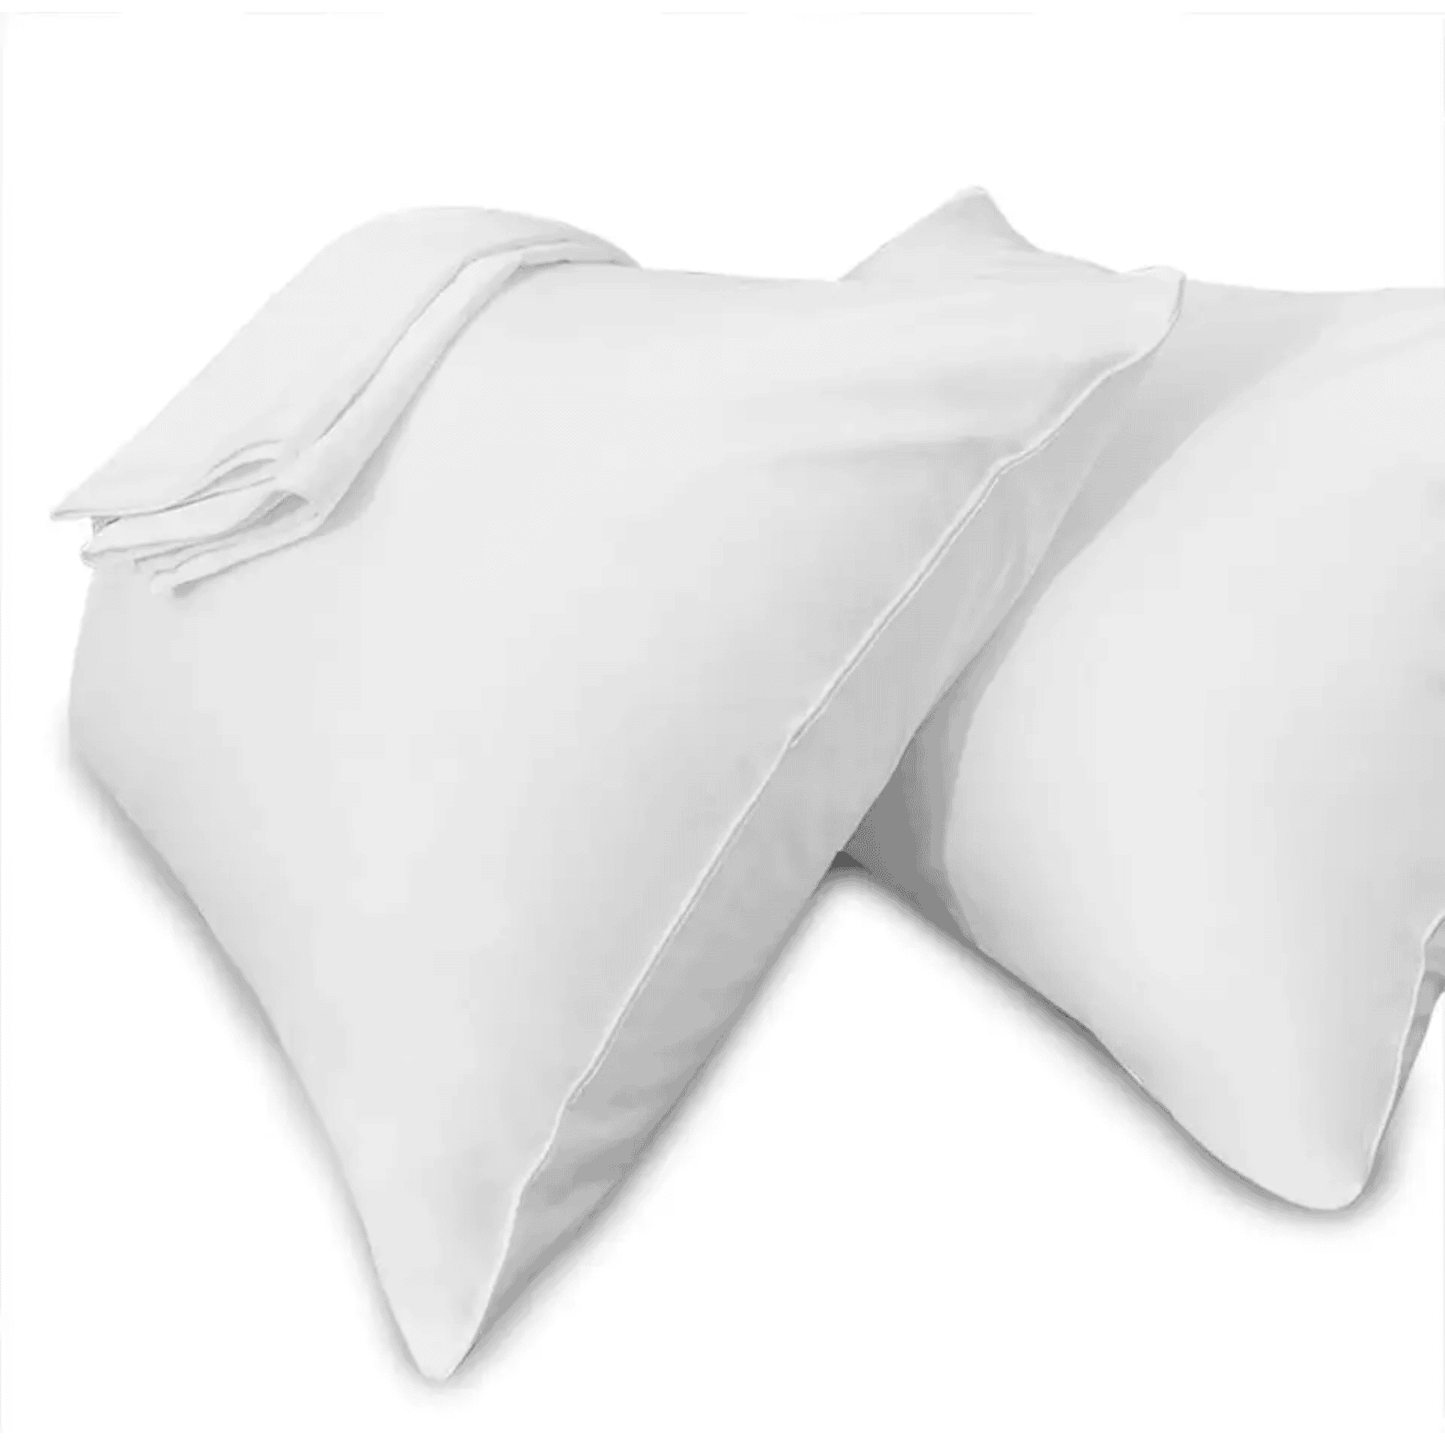 PREMIUM PILLOW CASES, SOLID WHITE PLAIN, ENVELOPE AND ZIPPER STYLE, {250 THREAD COUNT, 60% COTTON 40% POLYESTER}